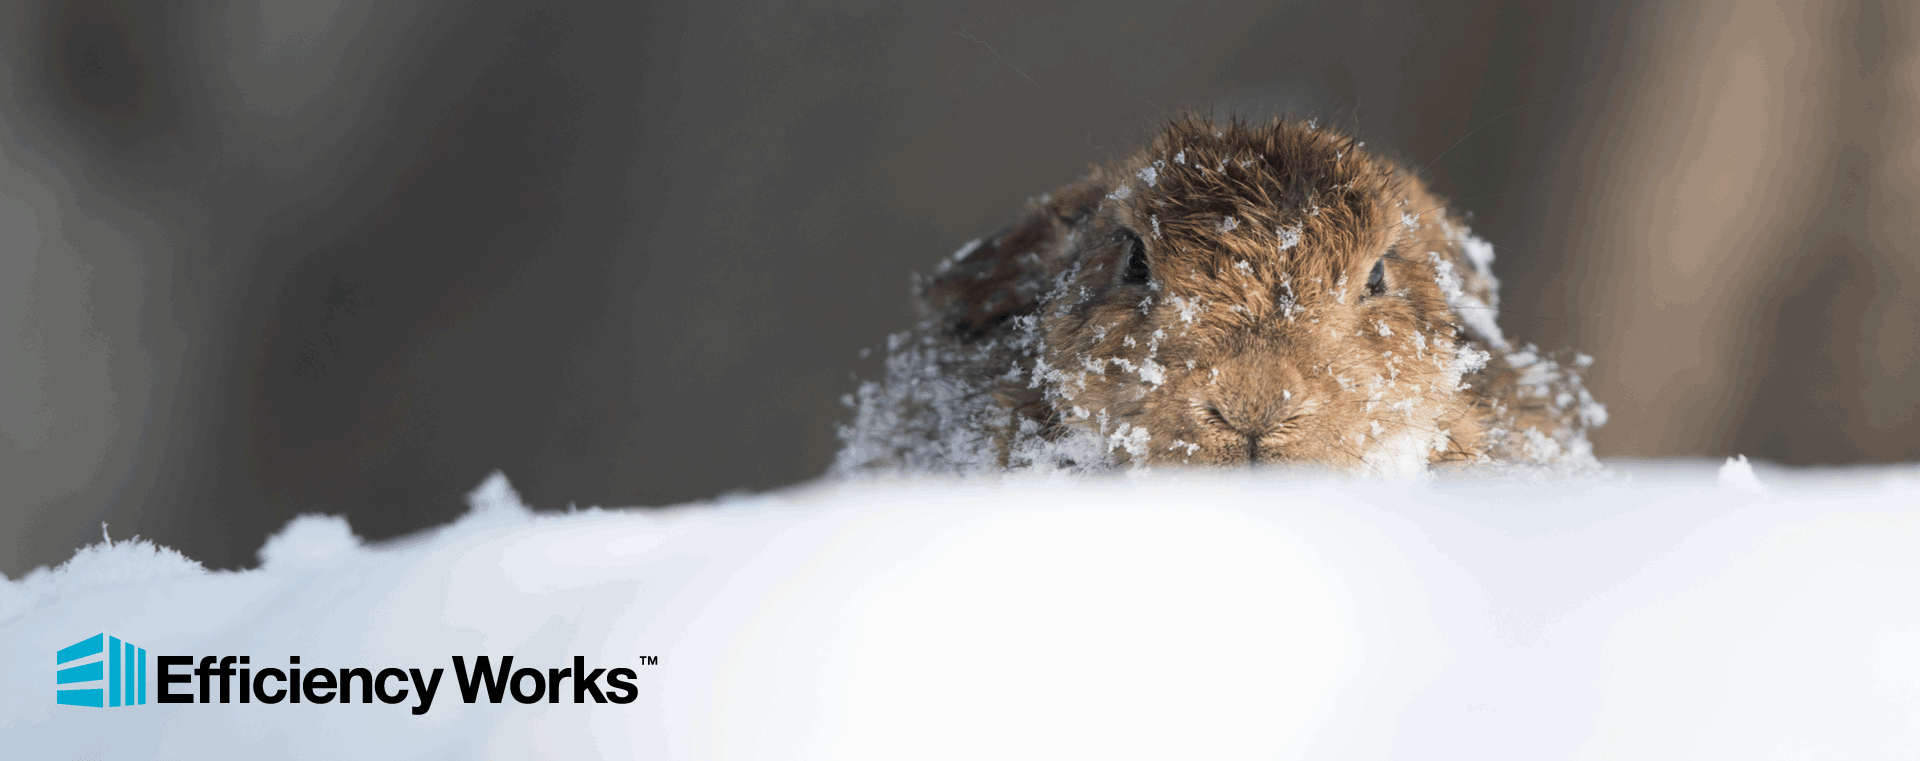 Groundhog Day: Energy efficiency tips for the next 6 weeks!